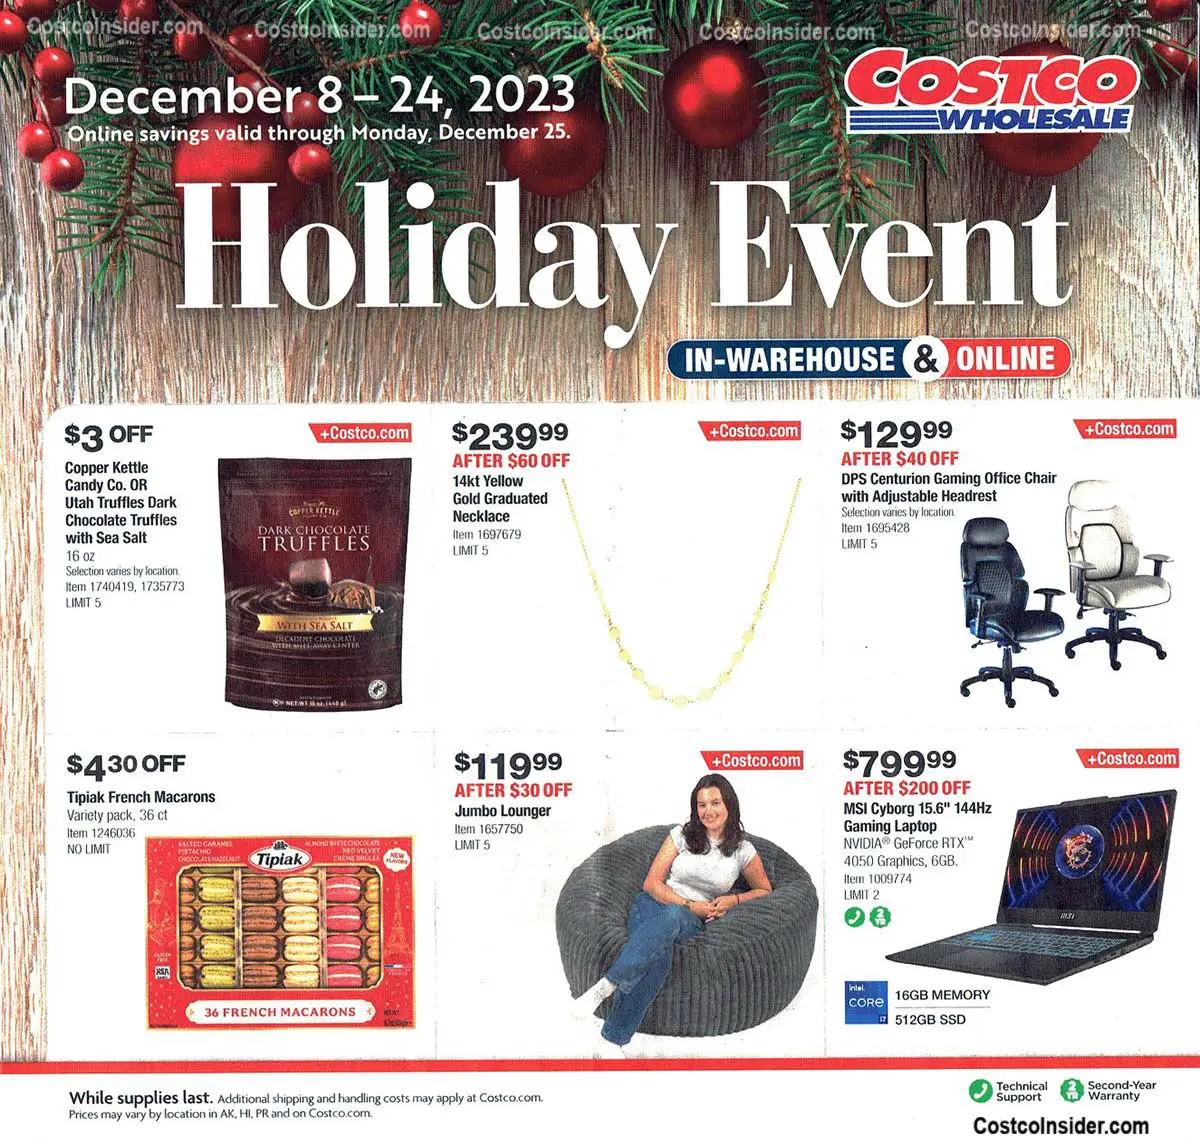 Costco December 2023 Holiday Event Coupons Page 1